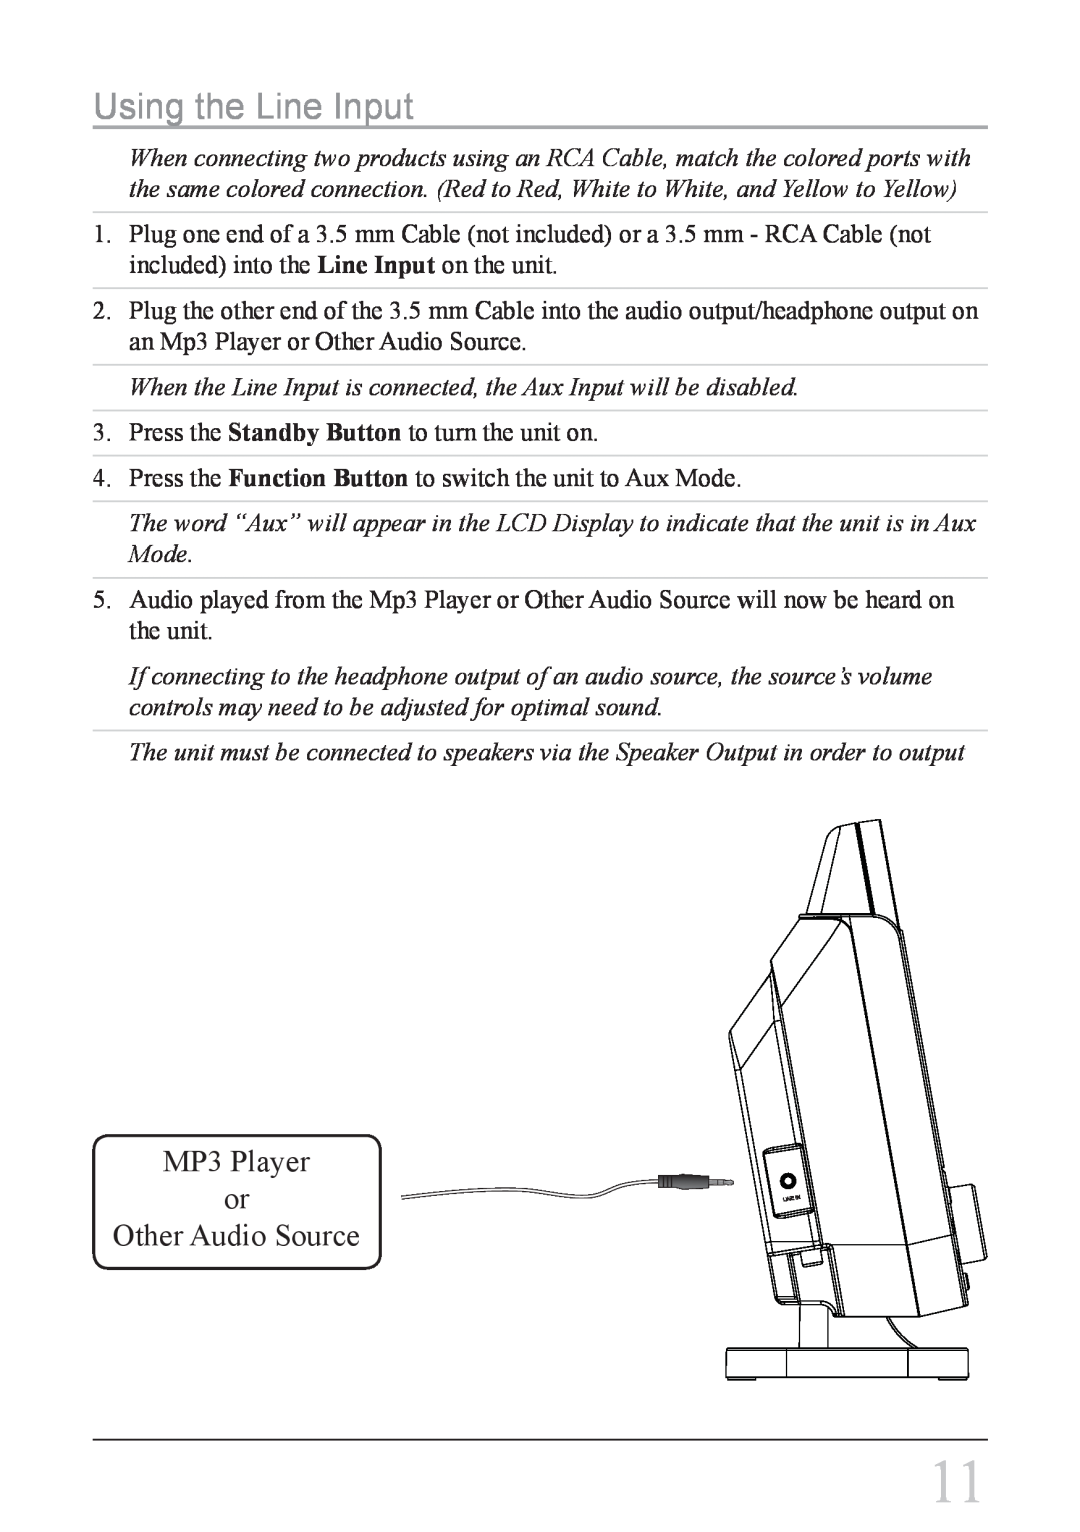 GPX HC208B instruction manual Using the Line Input, MP3 Player or Other Audio Source 